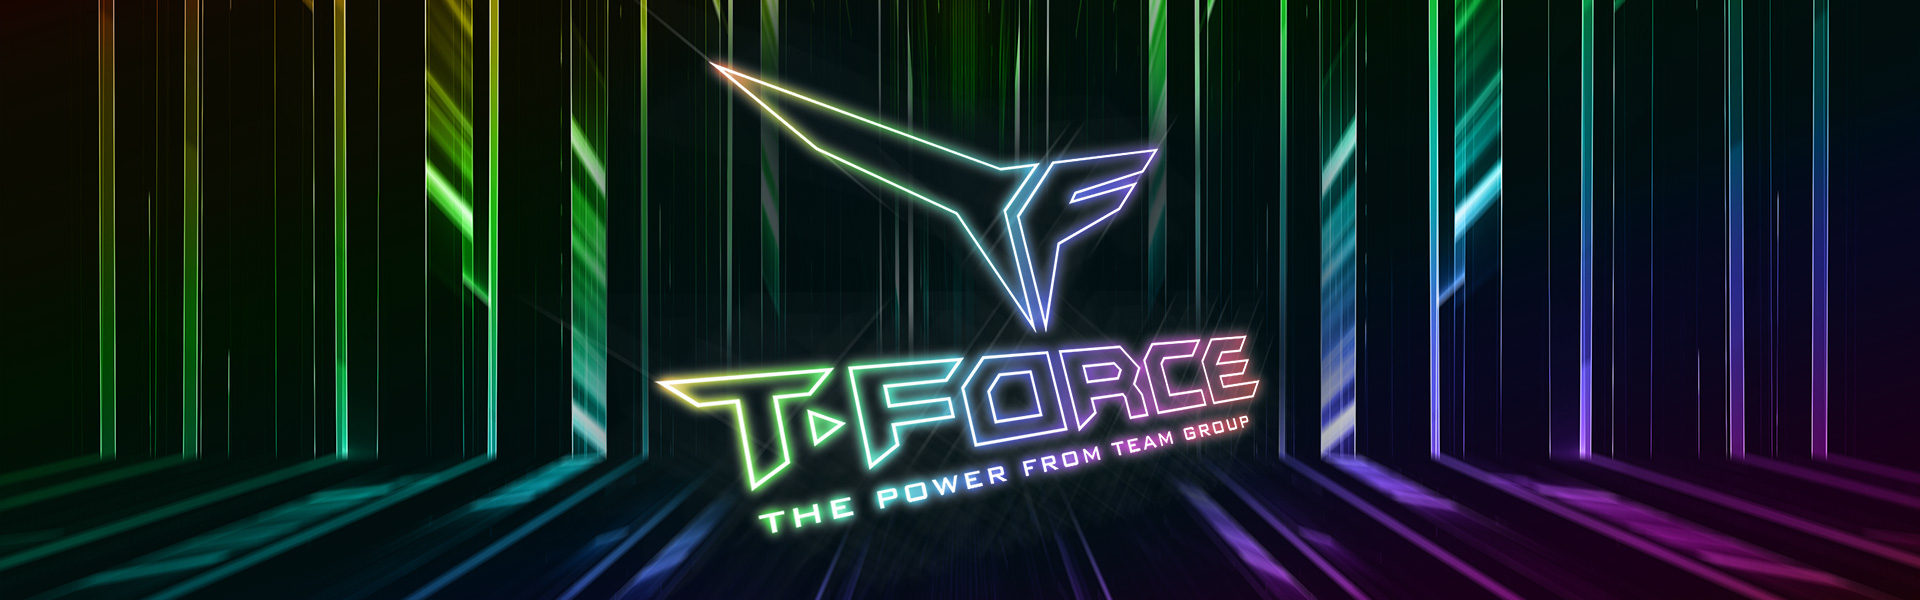 TEAMGROUP T-FORCE